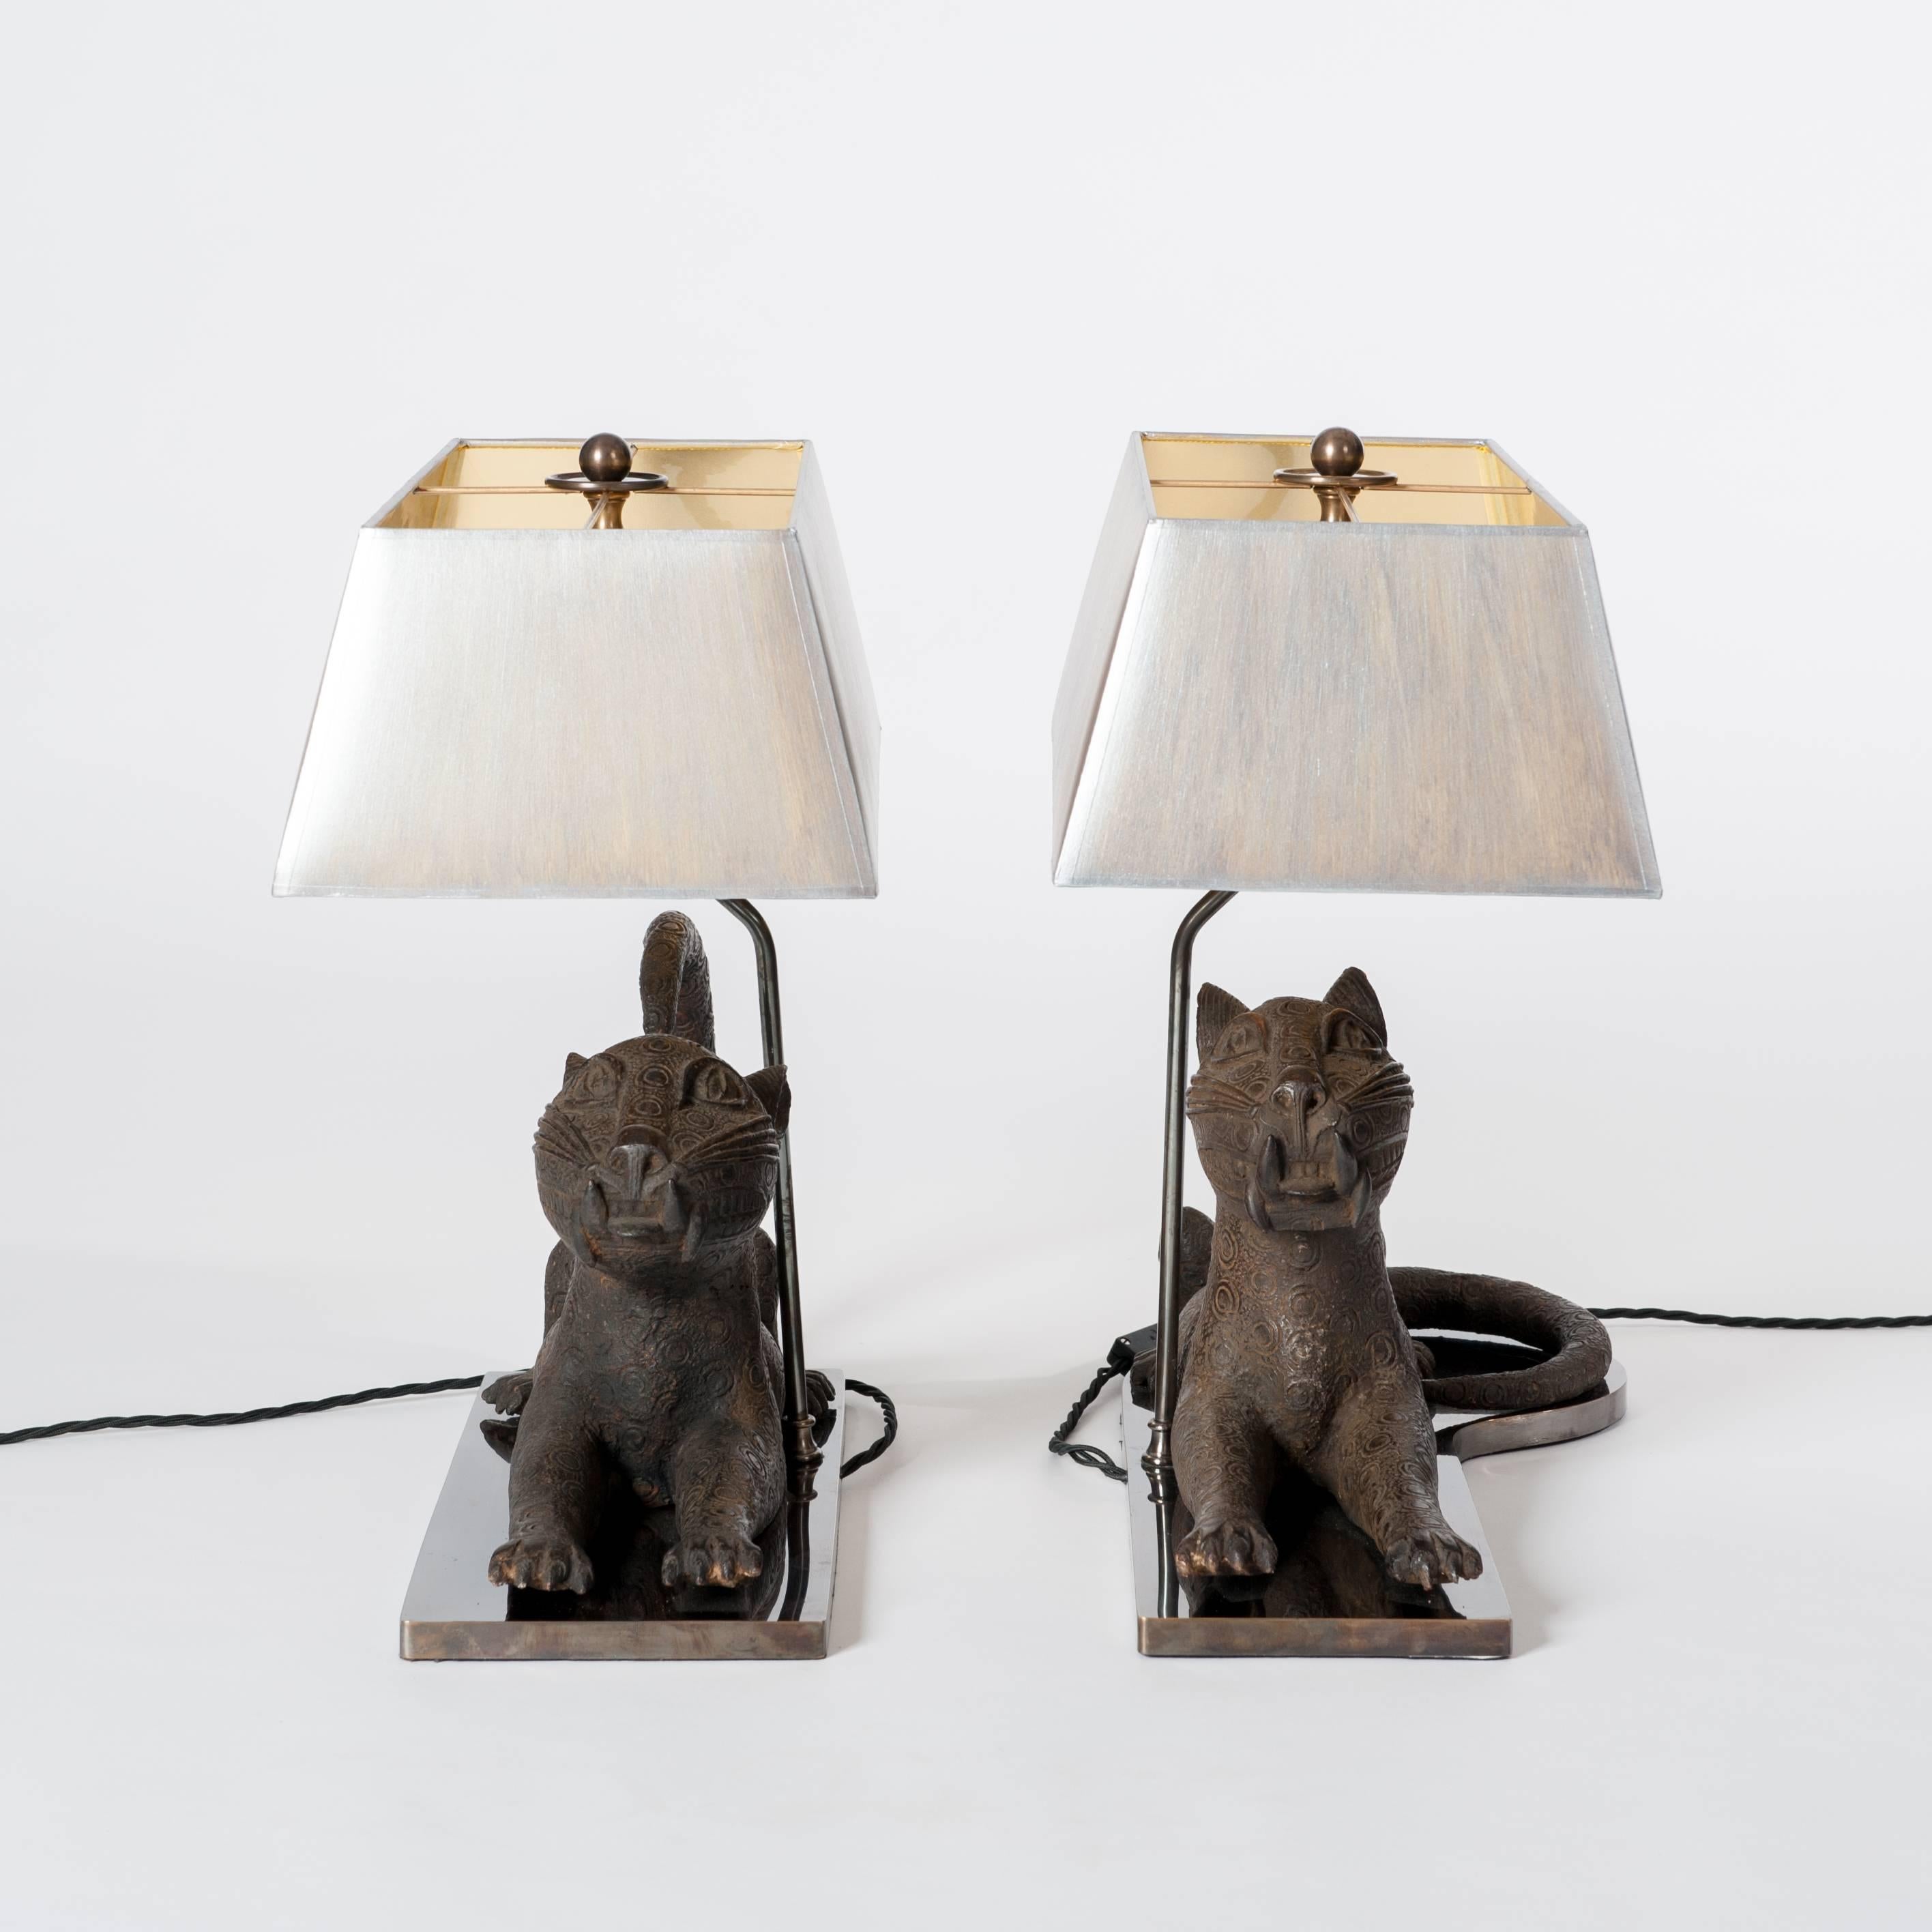 Beninese Pair of Colonial Bronze Leopards from Benin, Purpose Built Lamp Construction